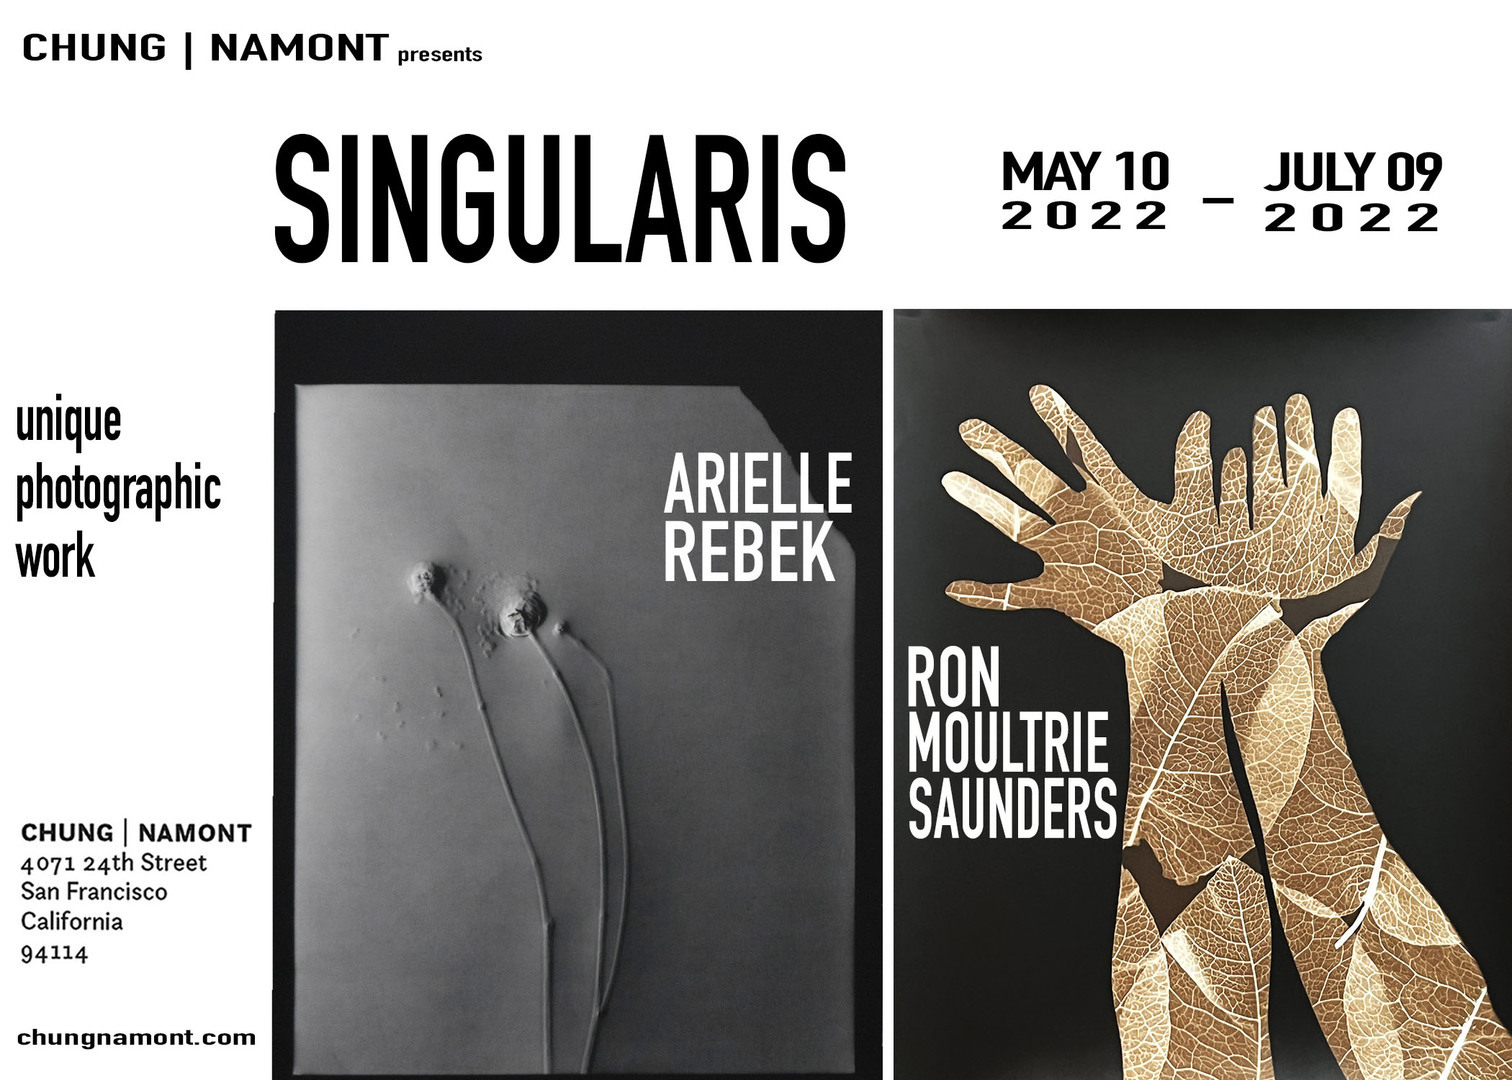 SINGULARIS - Exhibition of Unique Photographic Works at CHUNG | NAMONT art gallery in Noe Valley, San Francisco, California, United States